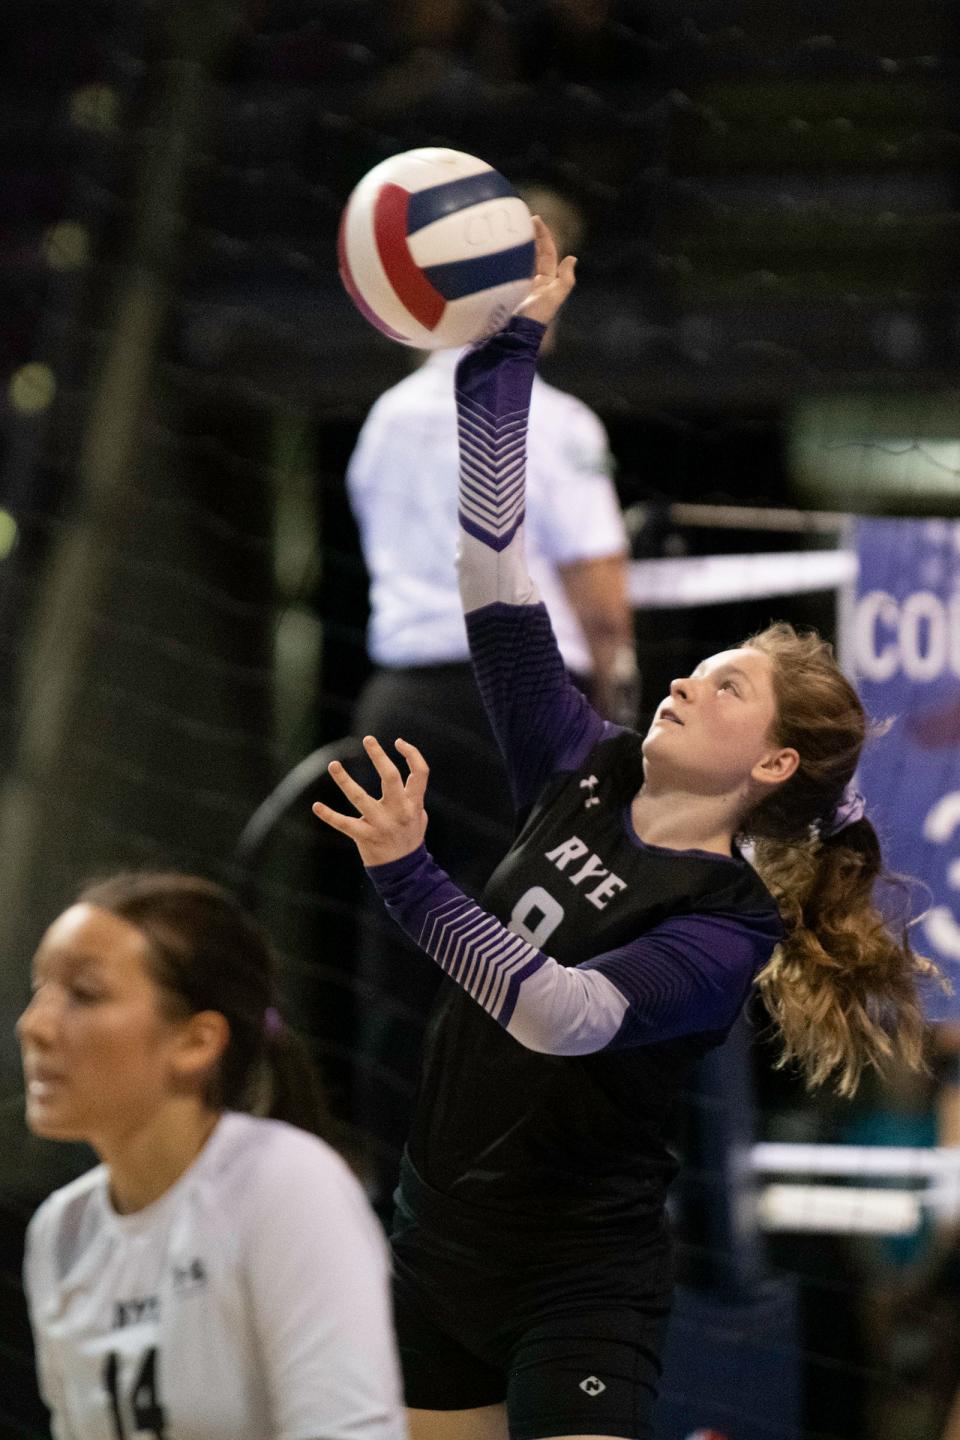 Rye High School's Jaklyn Newitt fires off a serve during the third day matchup with Holyoke at the Class 2A state girls volleyball tournament on Saturday, November 13, 2021.